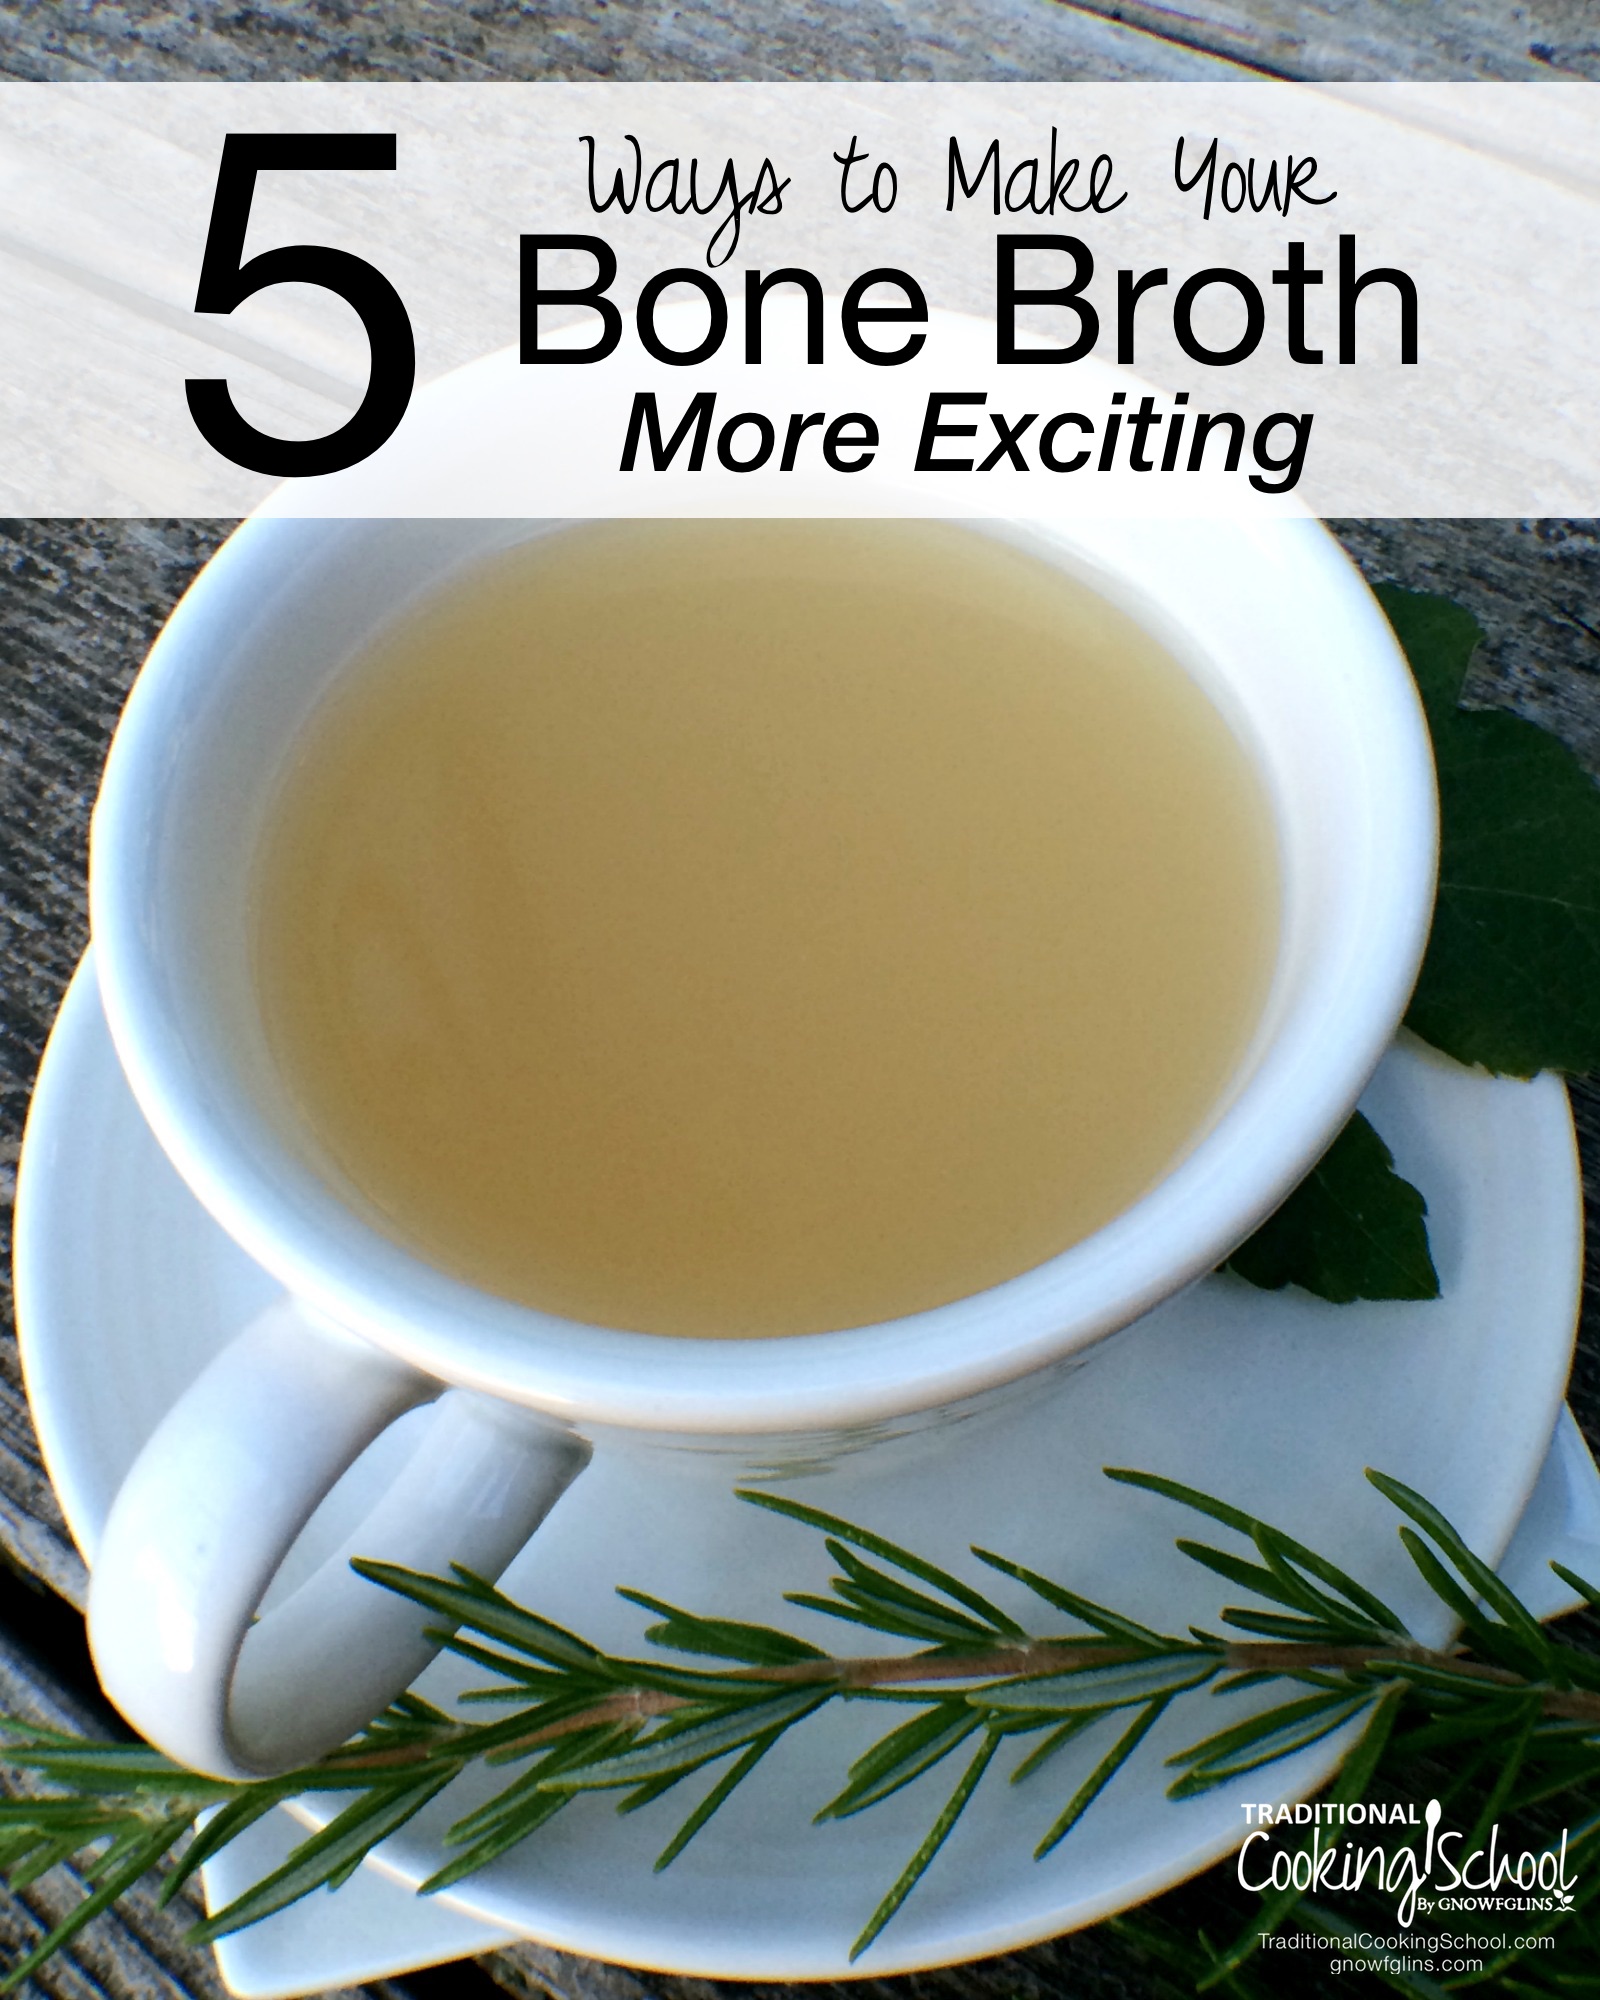 5 Ways to Make Your Bone Broth More Exciting | Do you enjoy bone broth? By the mug or the bowl, broth is good, nourishing stuff. You, however, may not like bone broth. This post is for you! Perhaps this will help make broth more appealing, so you too can enjoy this nutrient-dense food.| TraditionalCookingSchool.com 